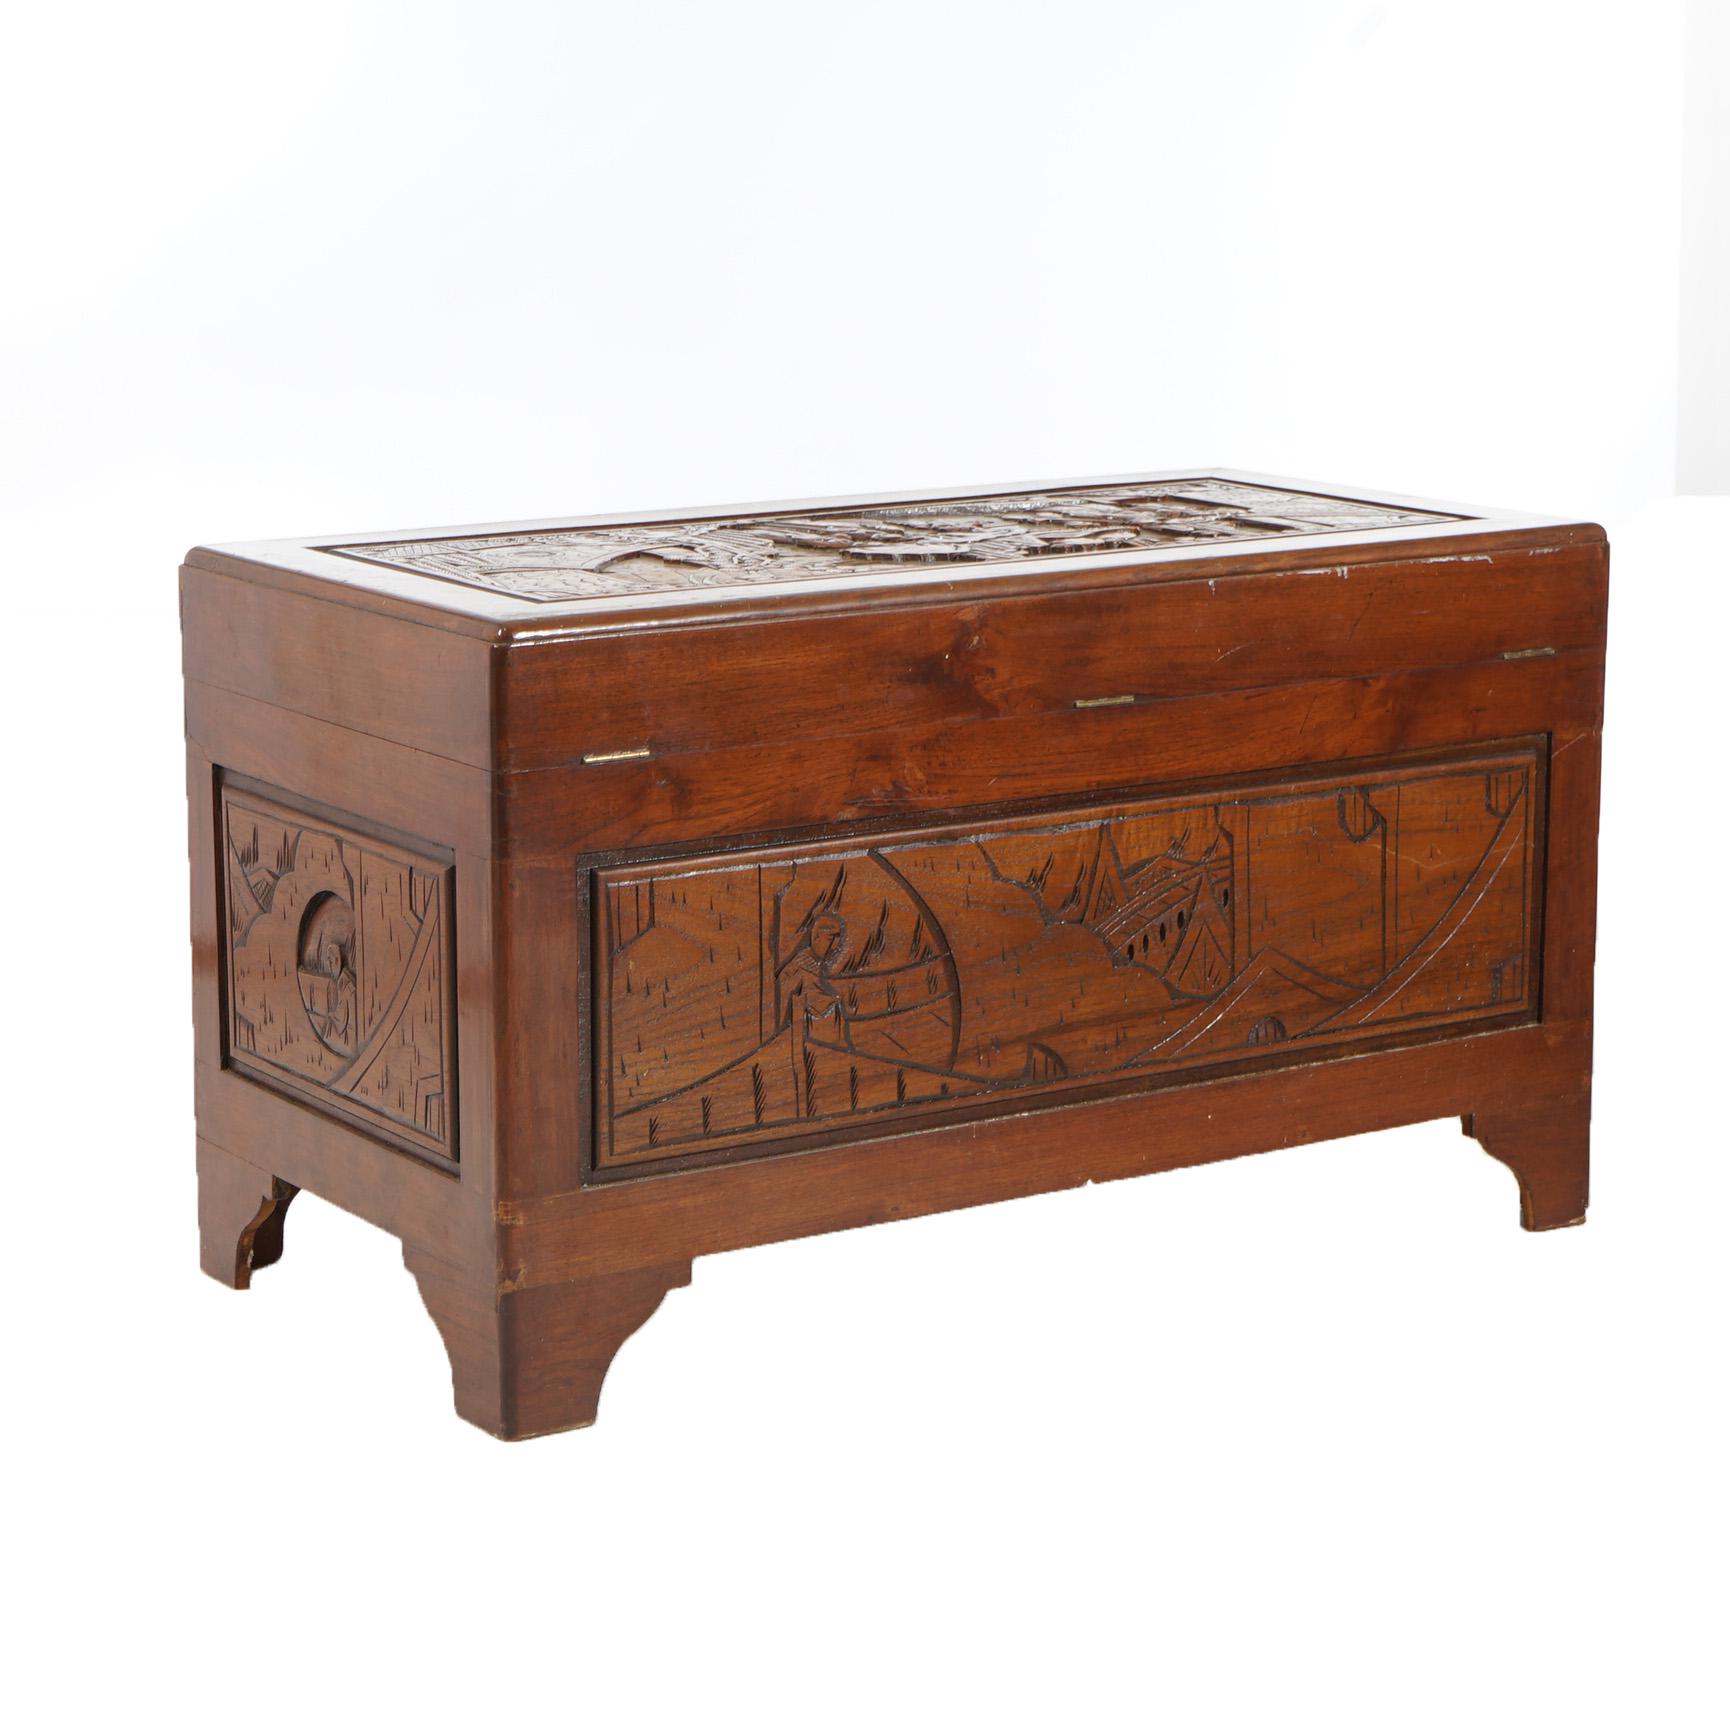 Chinese Carved Hardwood Figural Blanket Chest with Street Scene in Relief 20thC For Sale 5